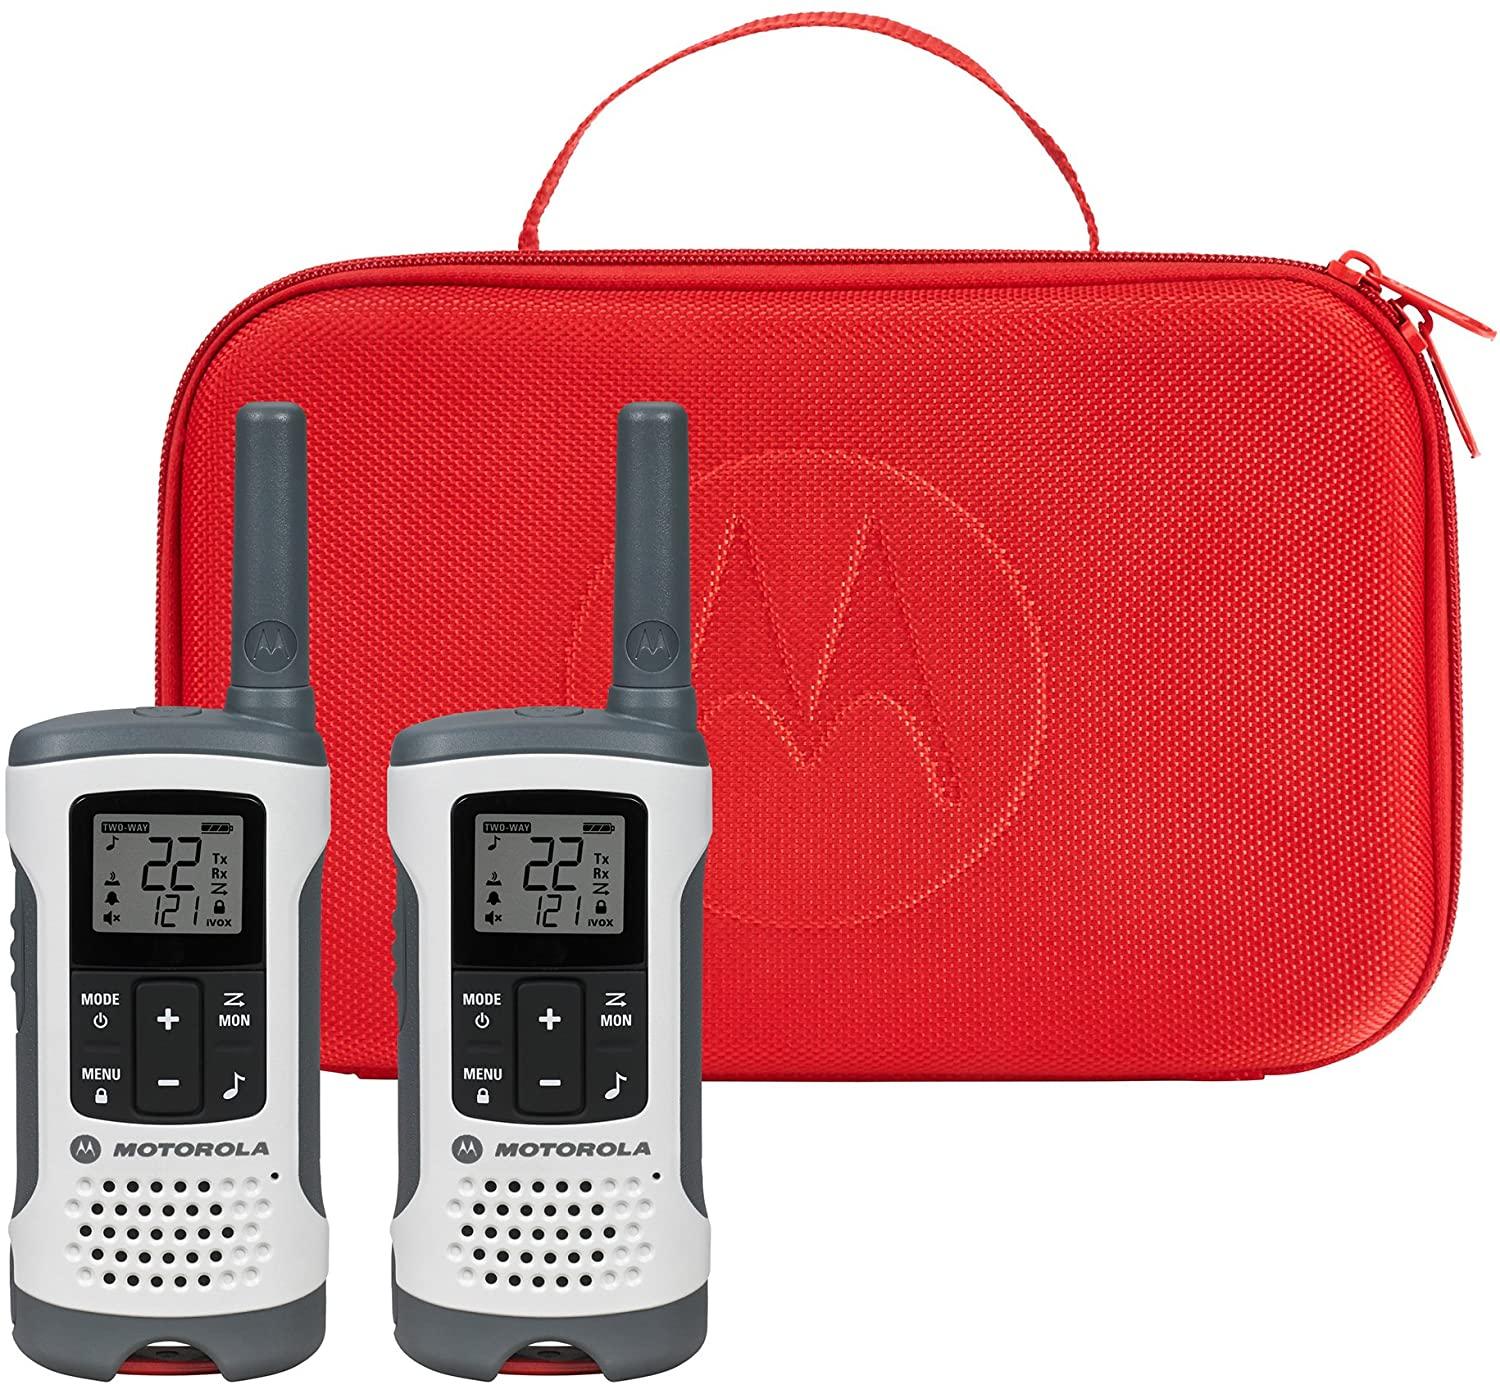 2 Motorola Talkabout T280 Rechargeable 2-Way Radios for $39.99 Shipped